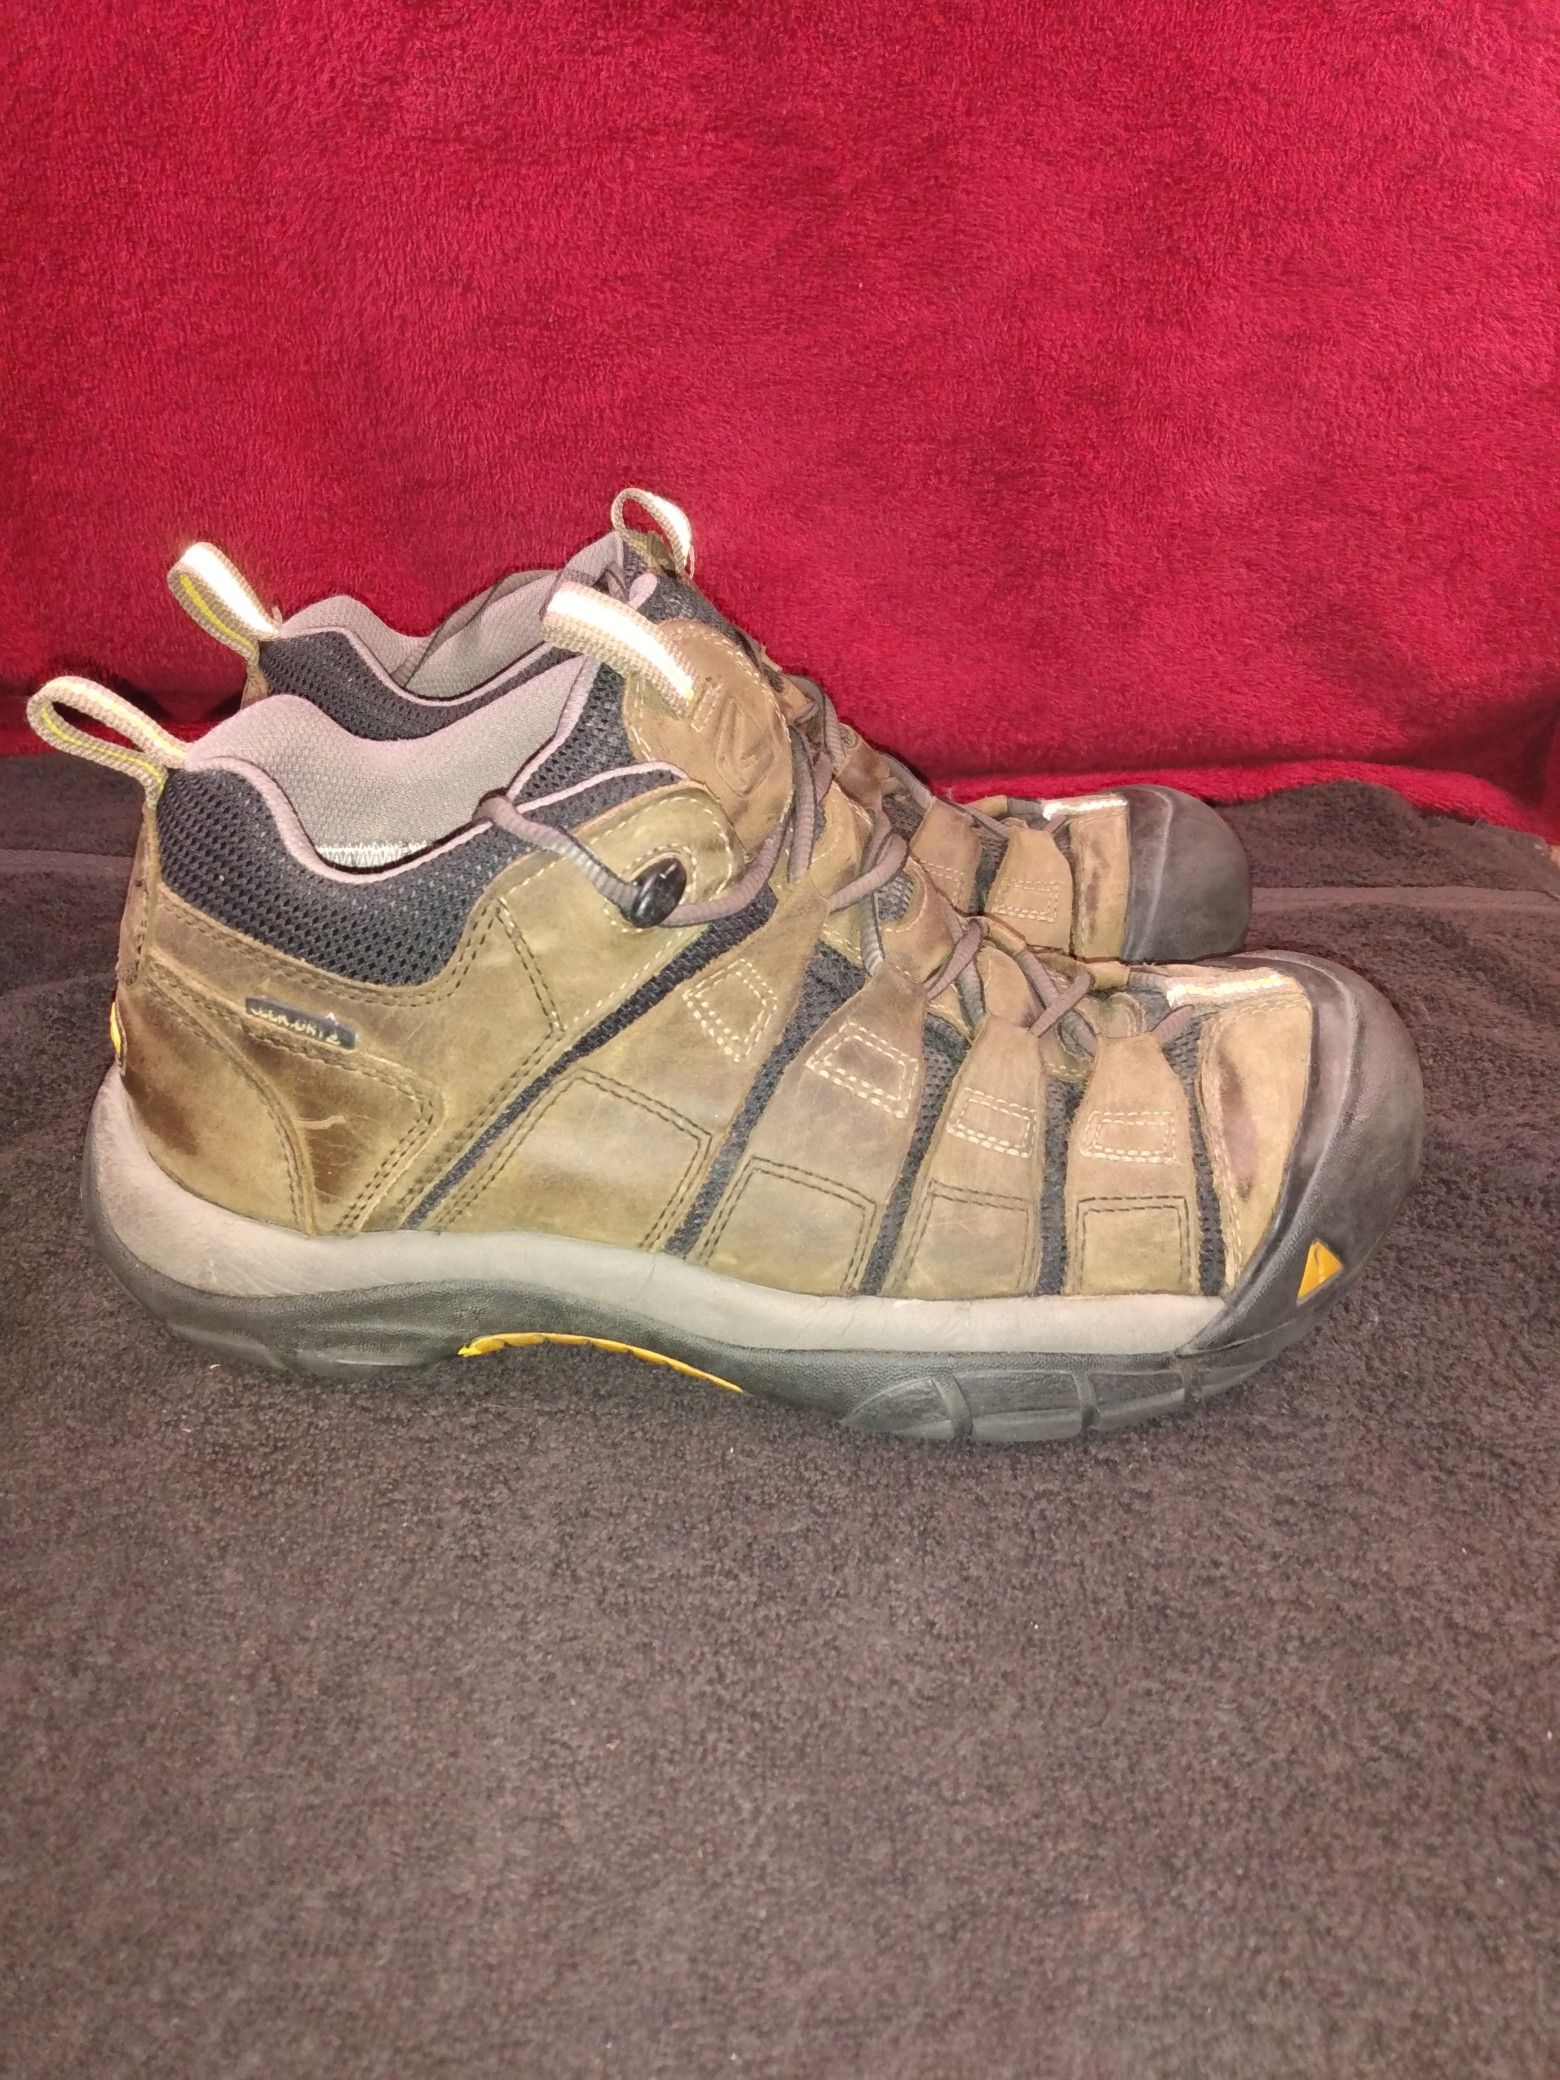 Keen 0808 Brown Leather Lace Up Keen Dry Shoes Size 10 US, UK 9